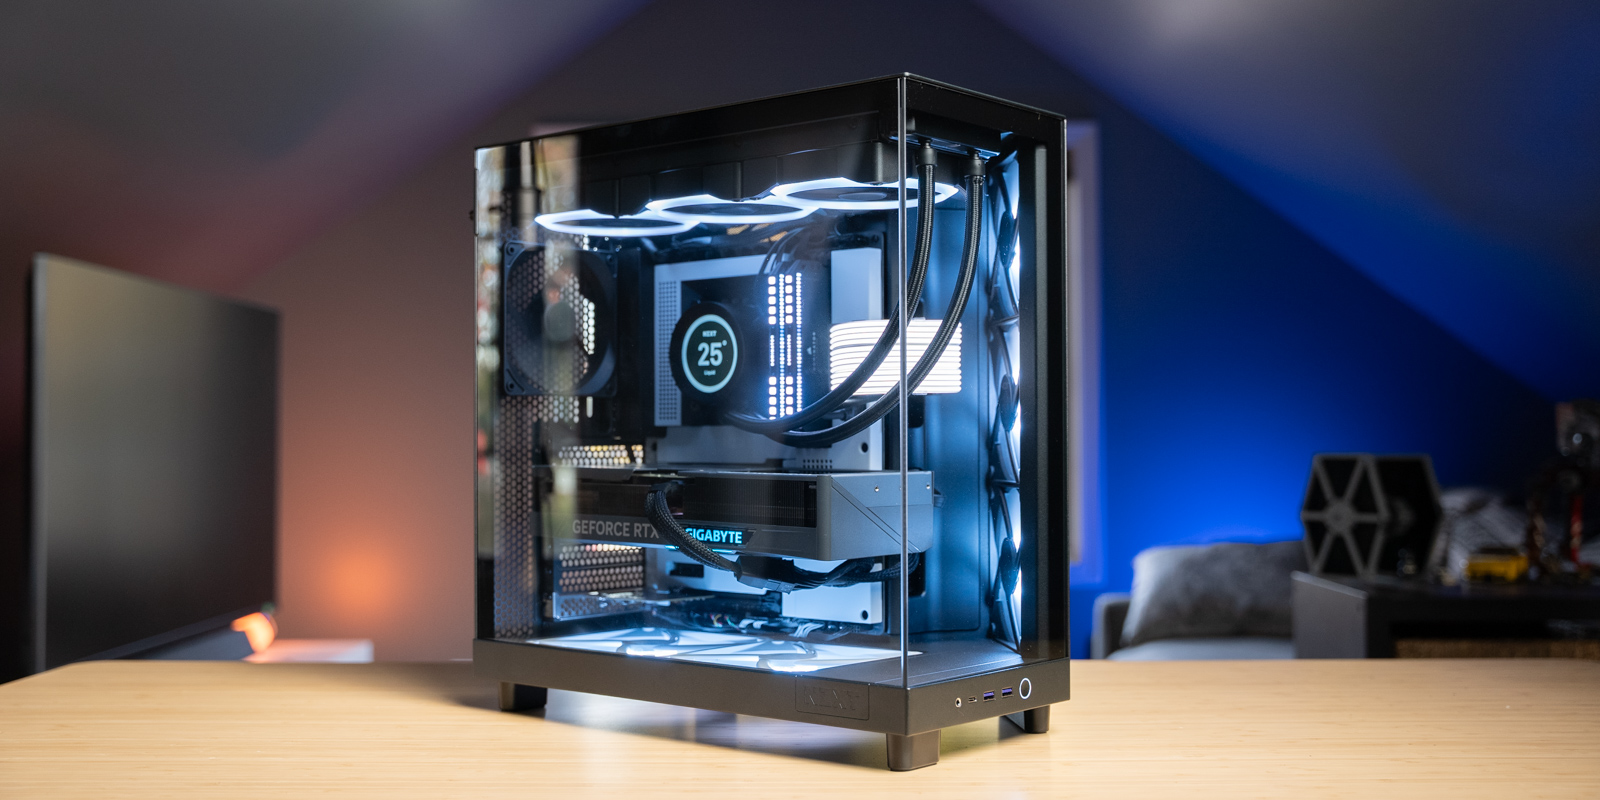 NZXT looks to lure beginning gamers with its $699 Starter PC desktop